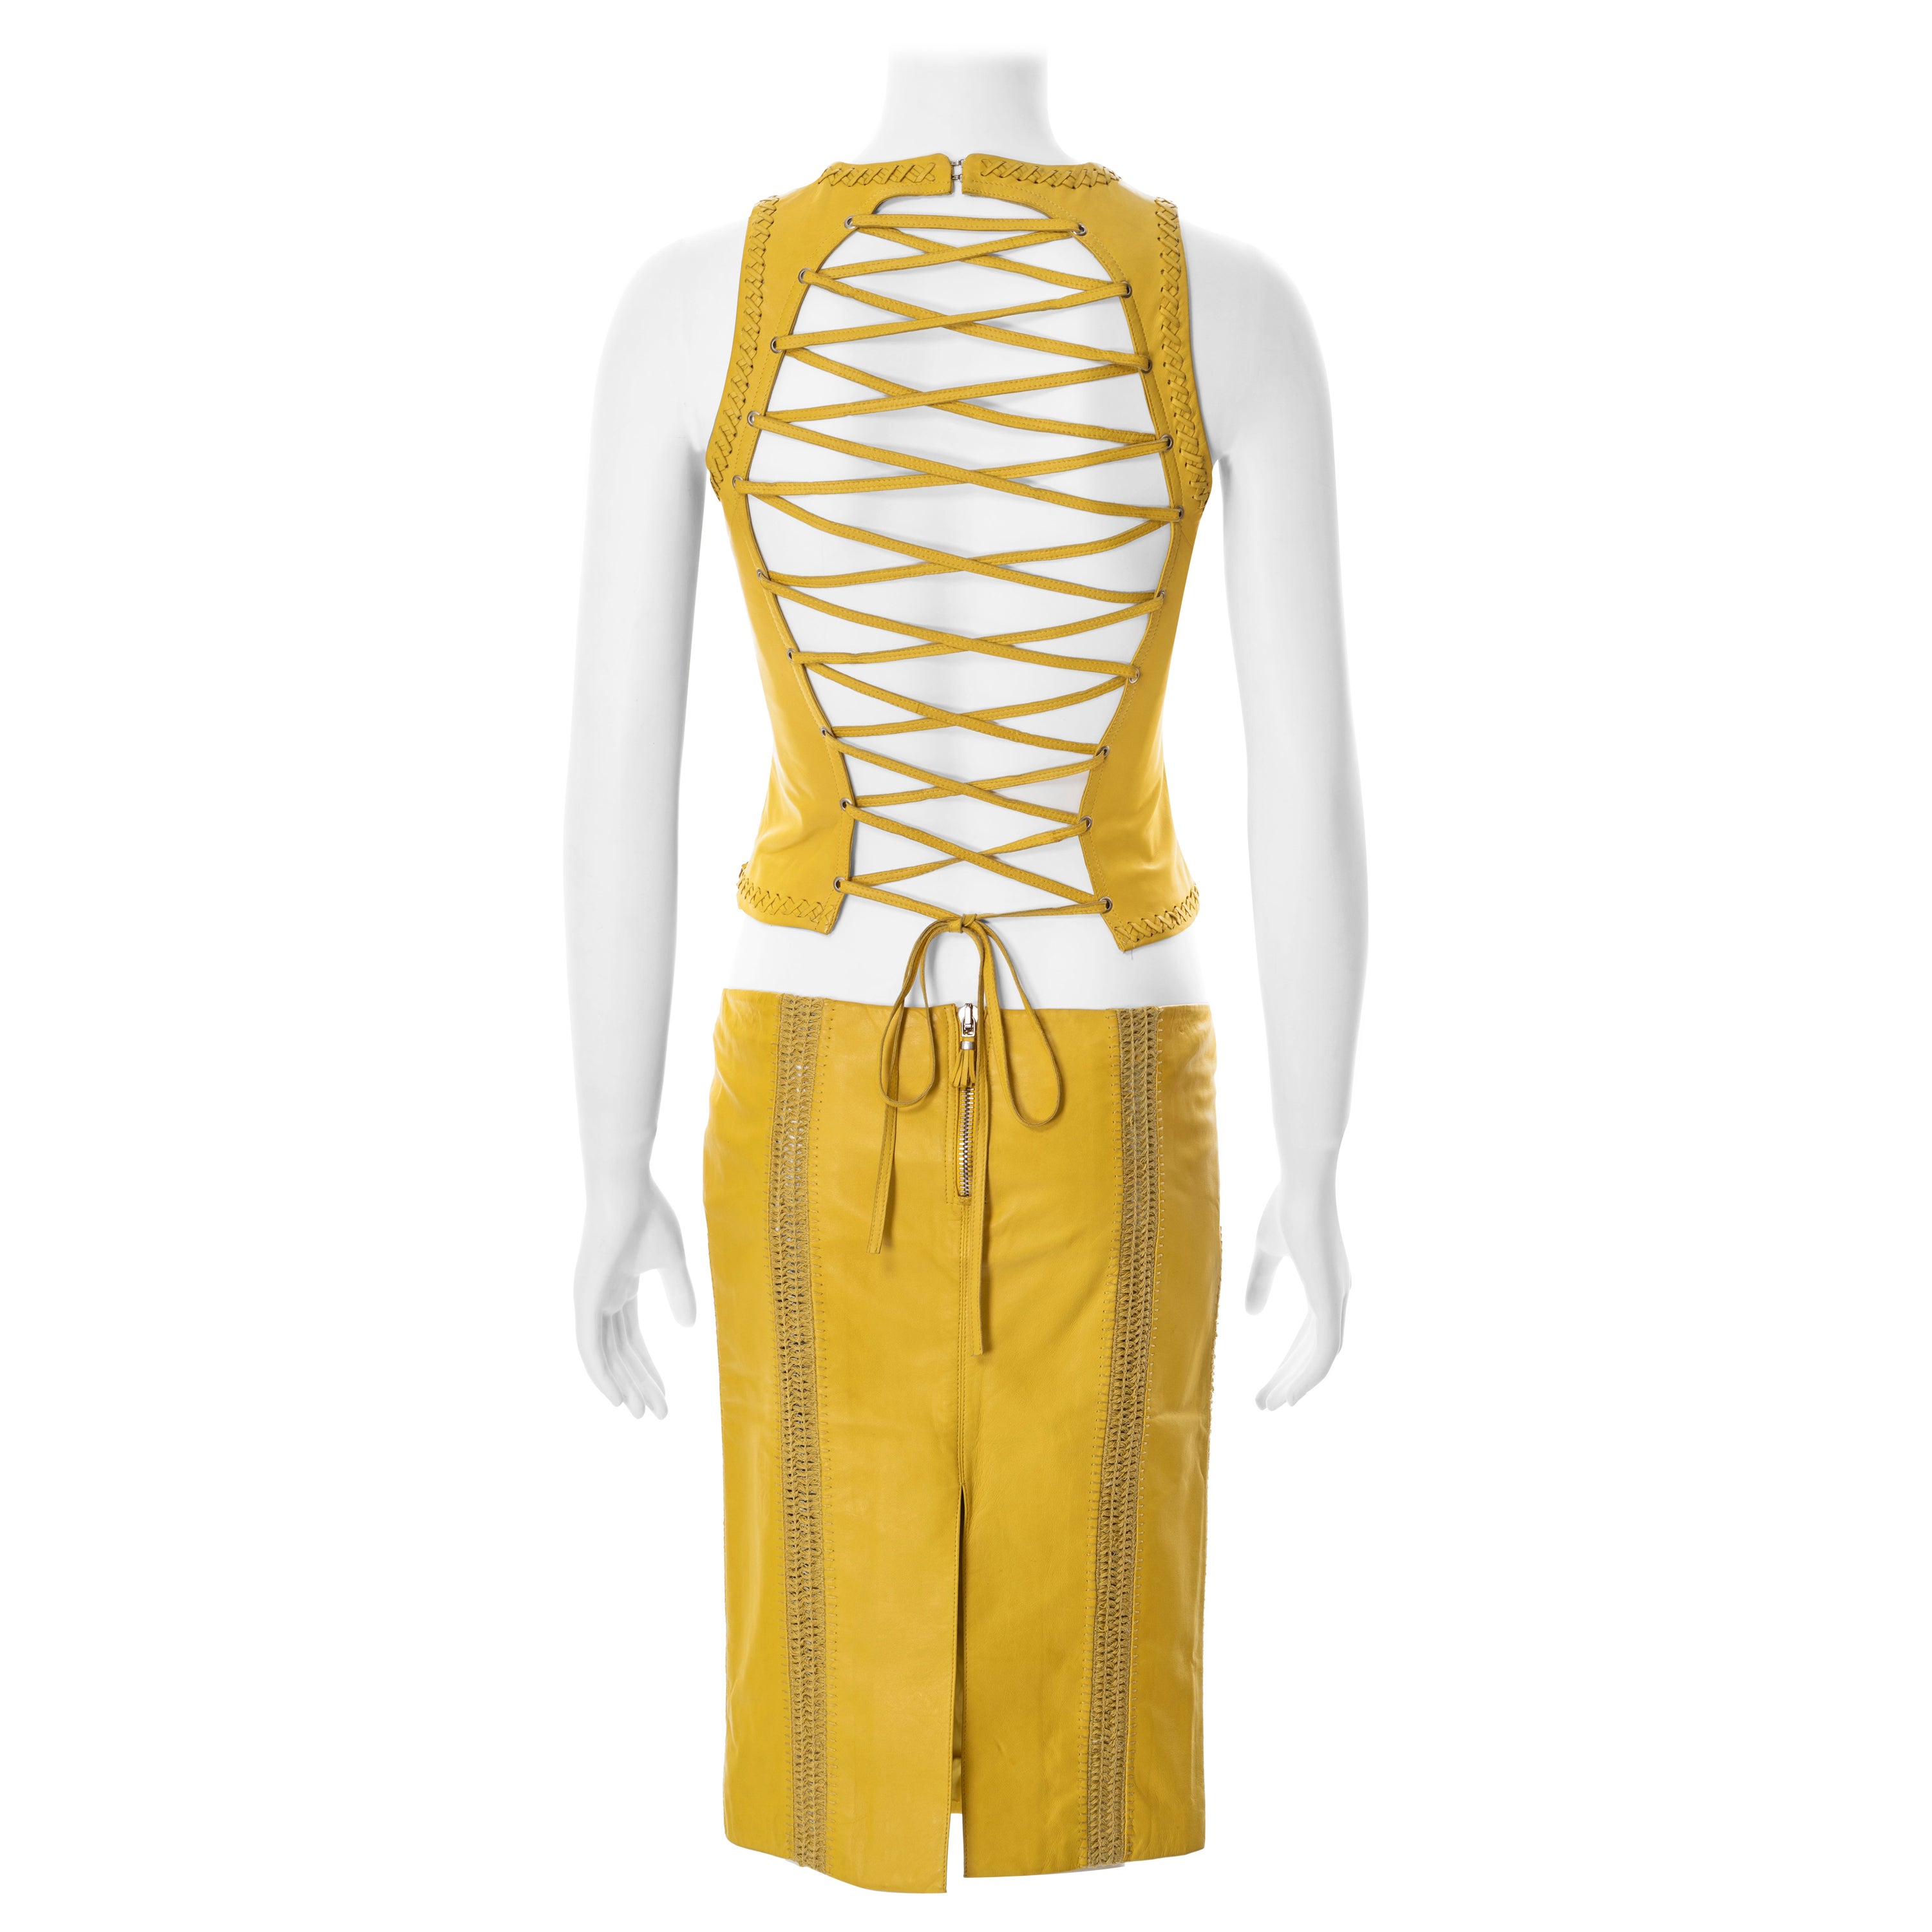 Gianni Versace yellow lambskin leather top and skirt, ss 2003 For Sale